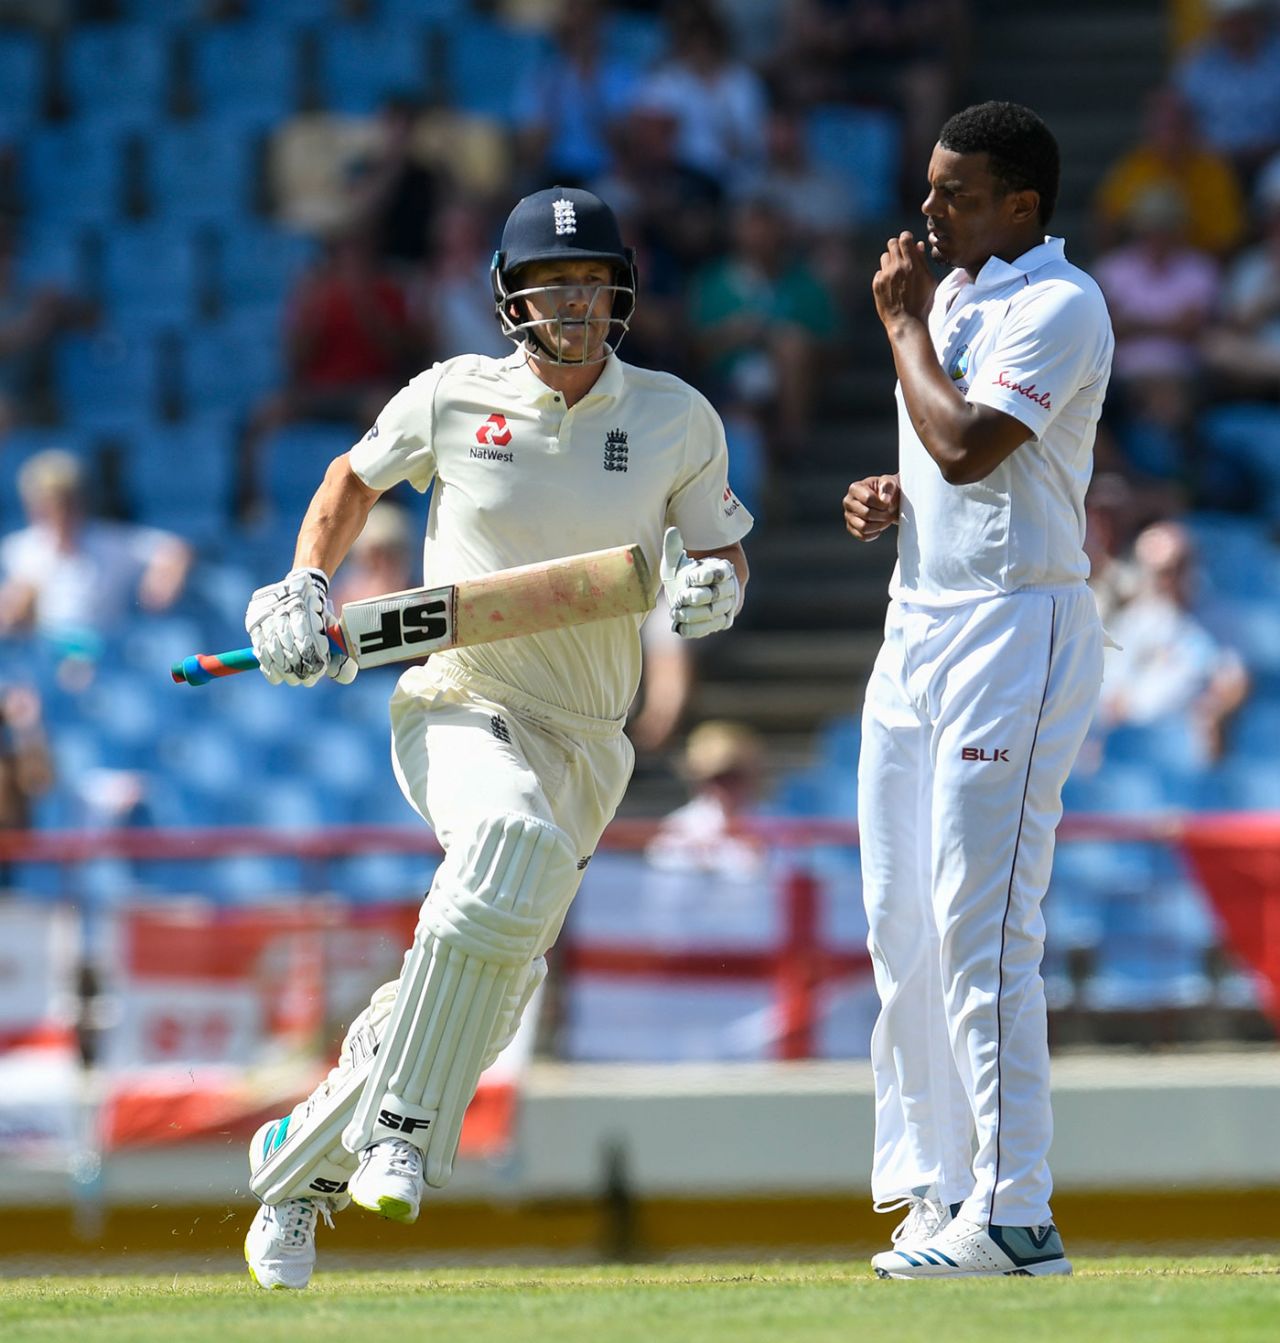 Joe Denly adds to his runs tally, West Indies v England, 3rd Test, St Lucia, 3rd day, February 11, 2019